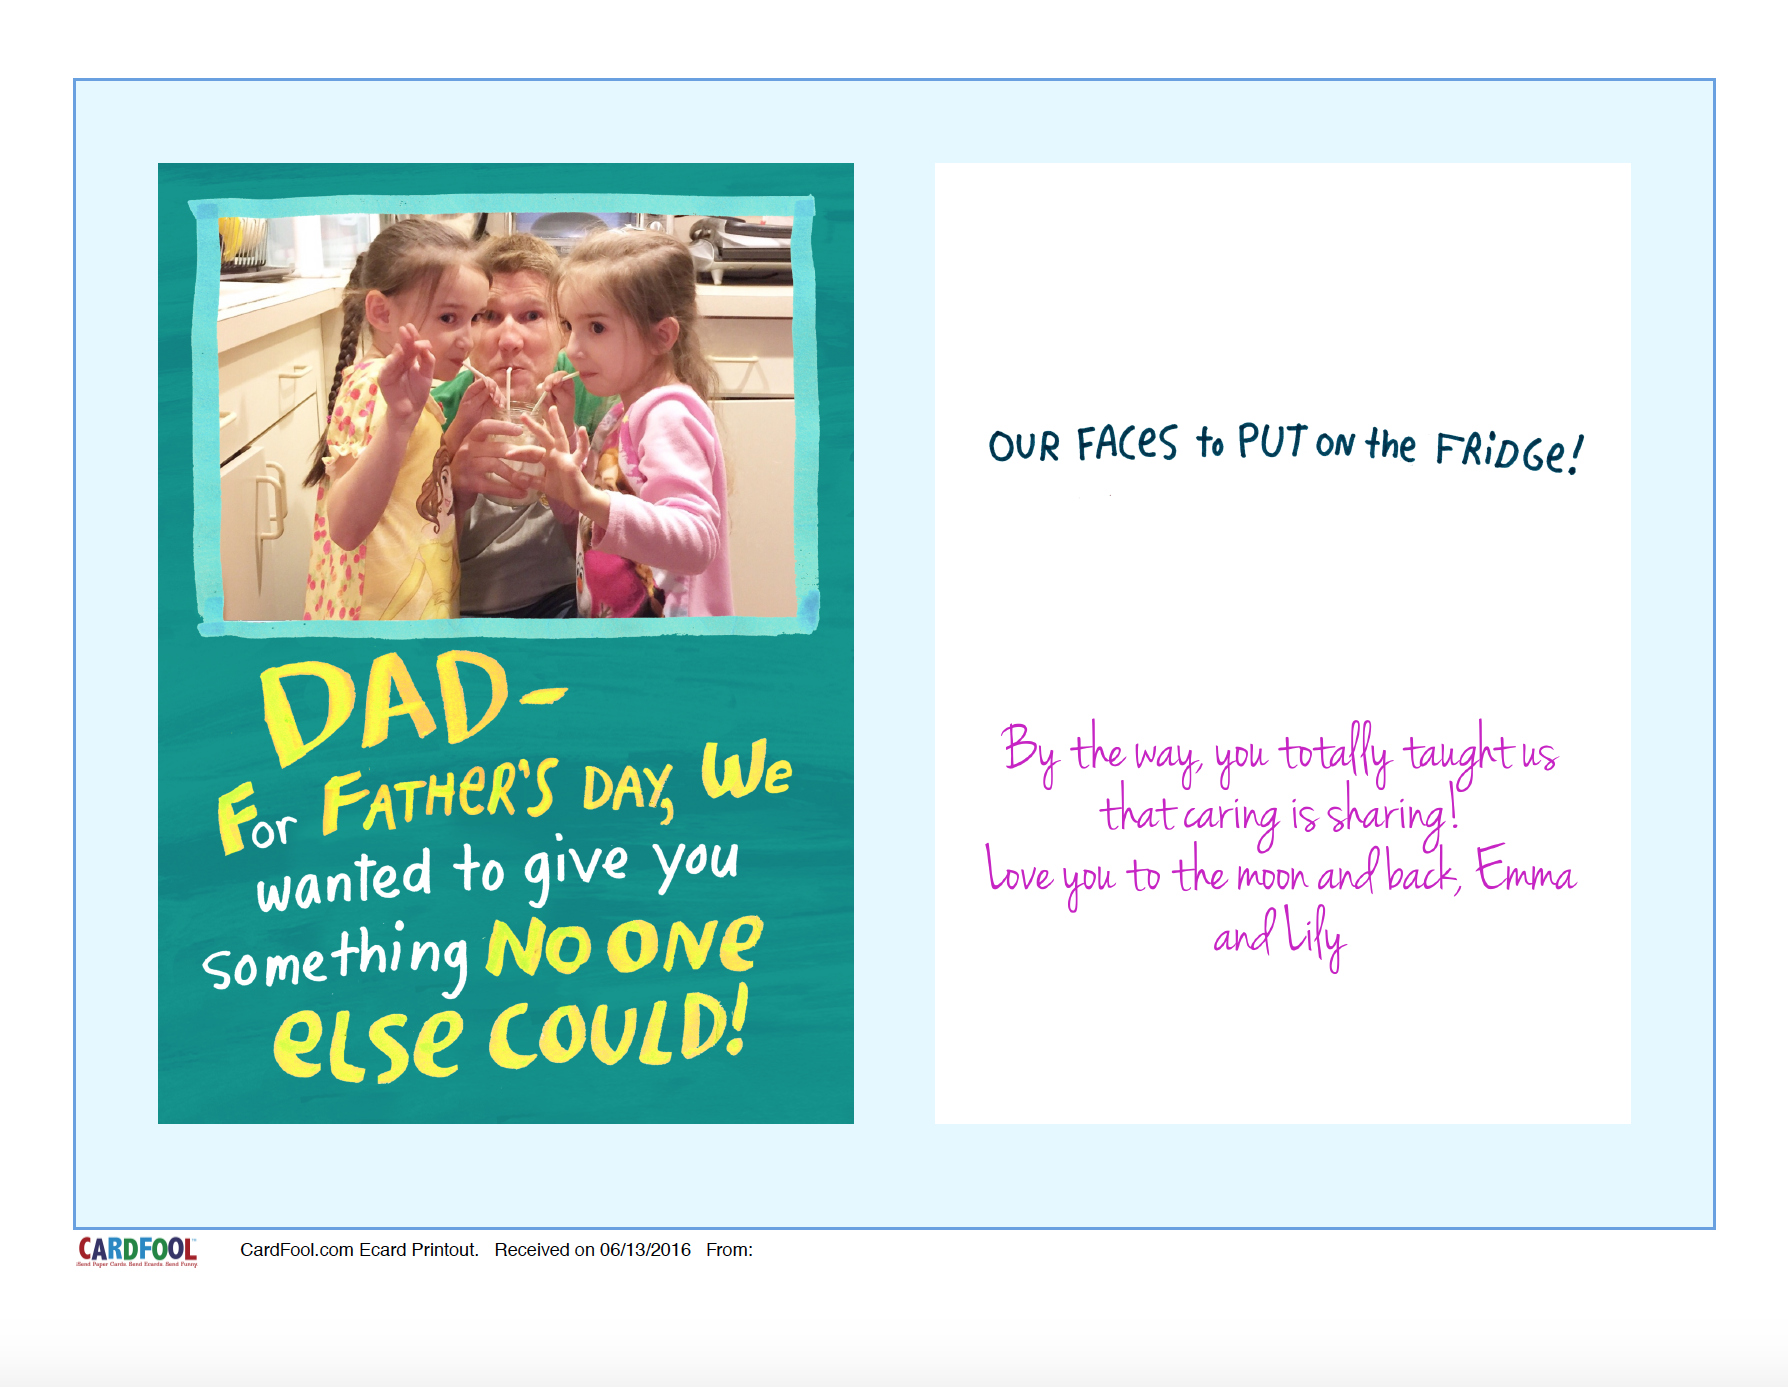 CardFool Father's Day Ecard